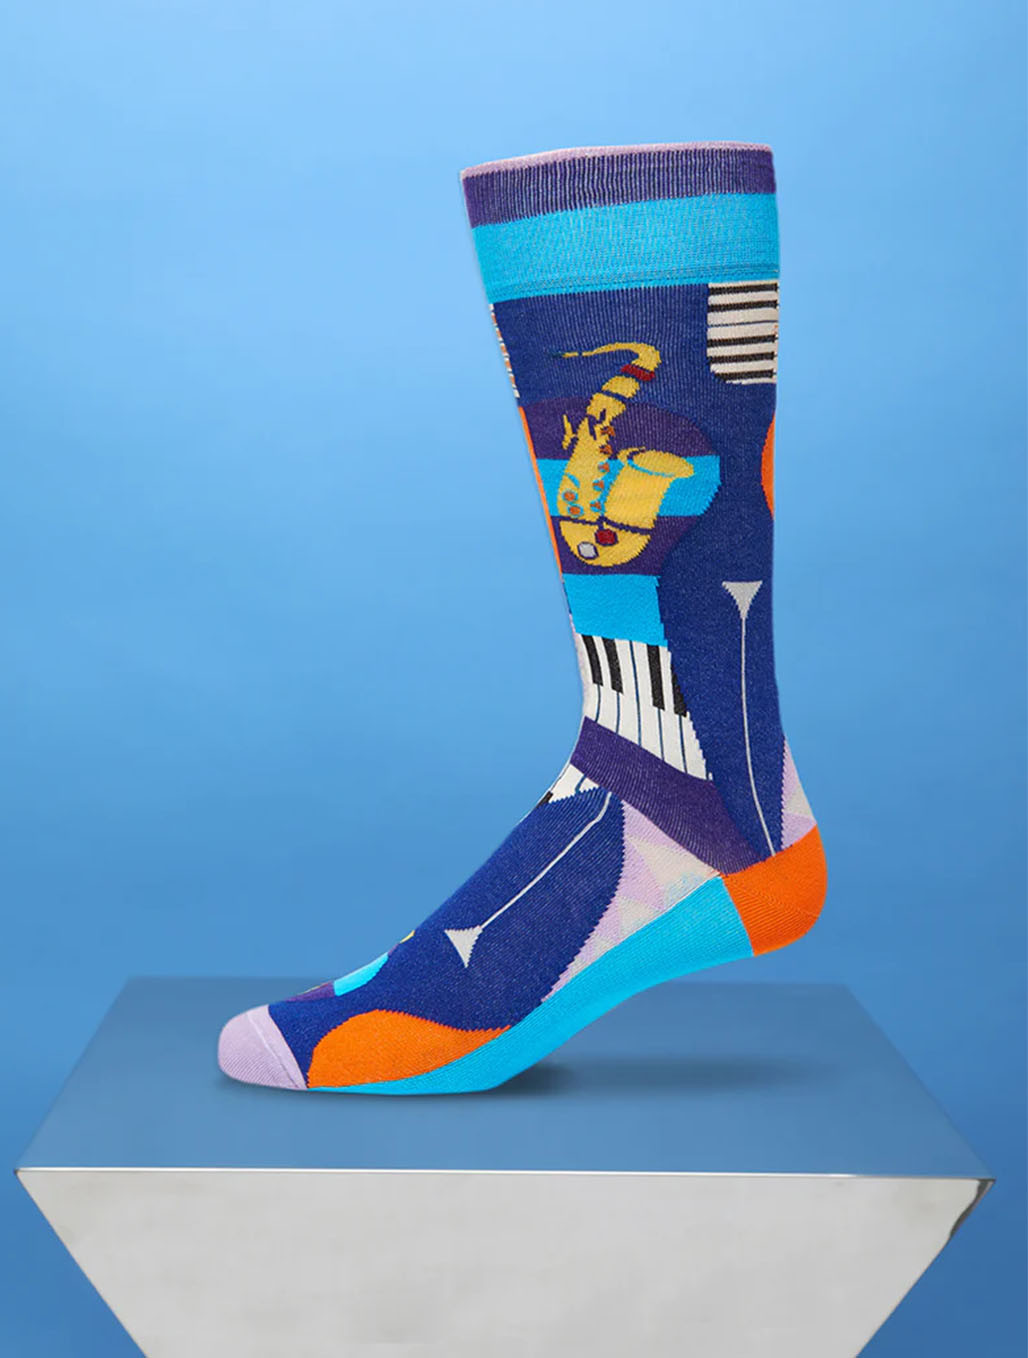 Jazz Instrument Print Sock Made in Italy